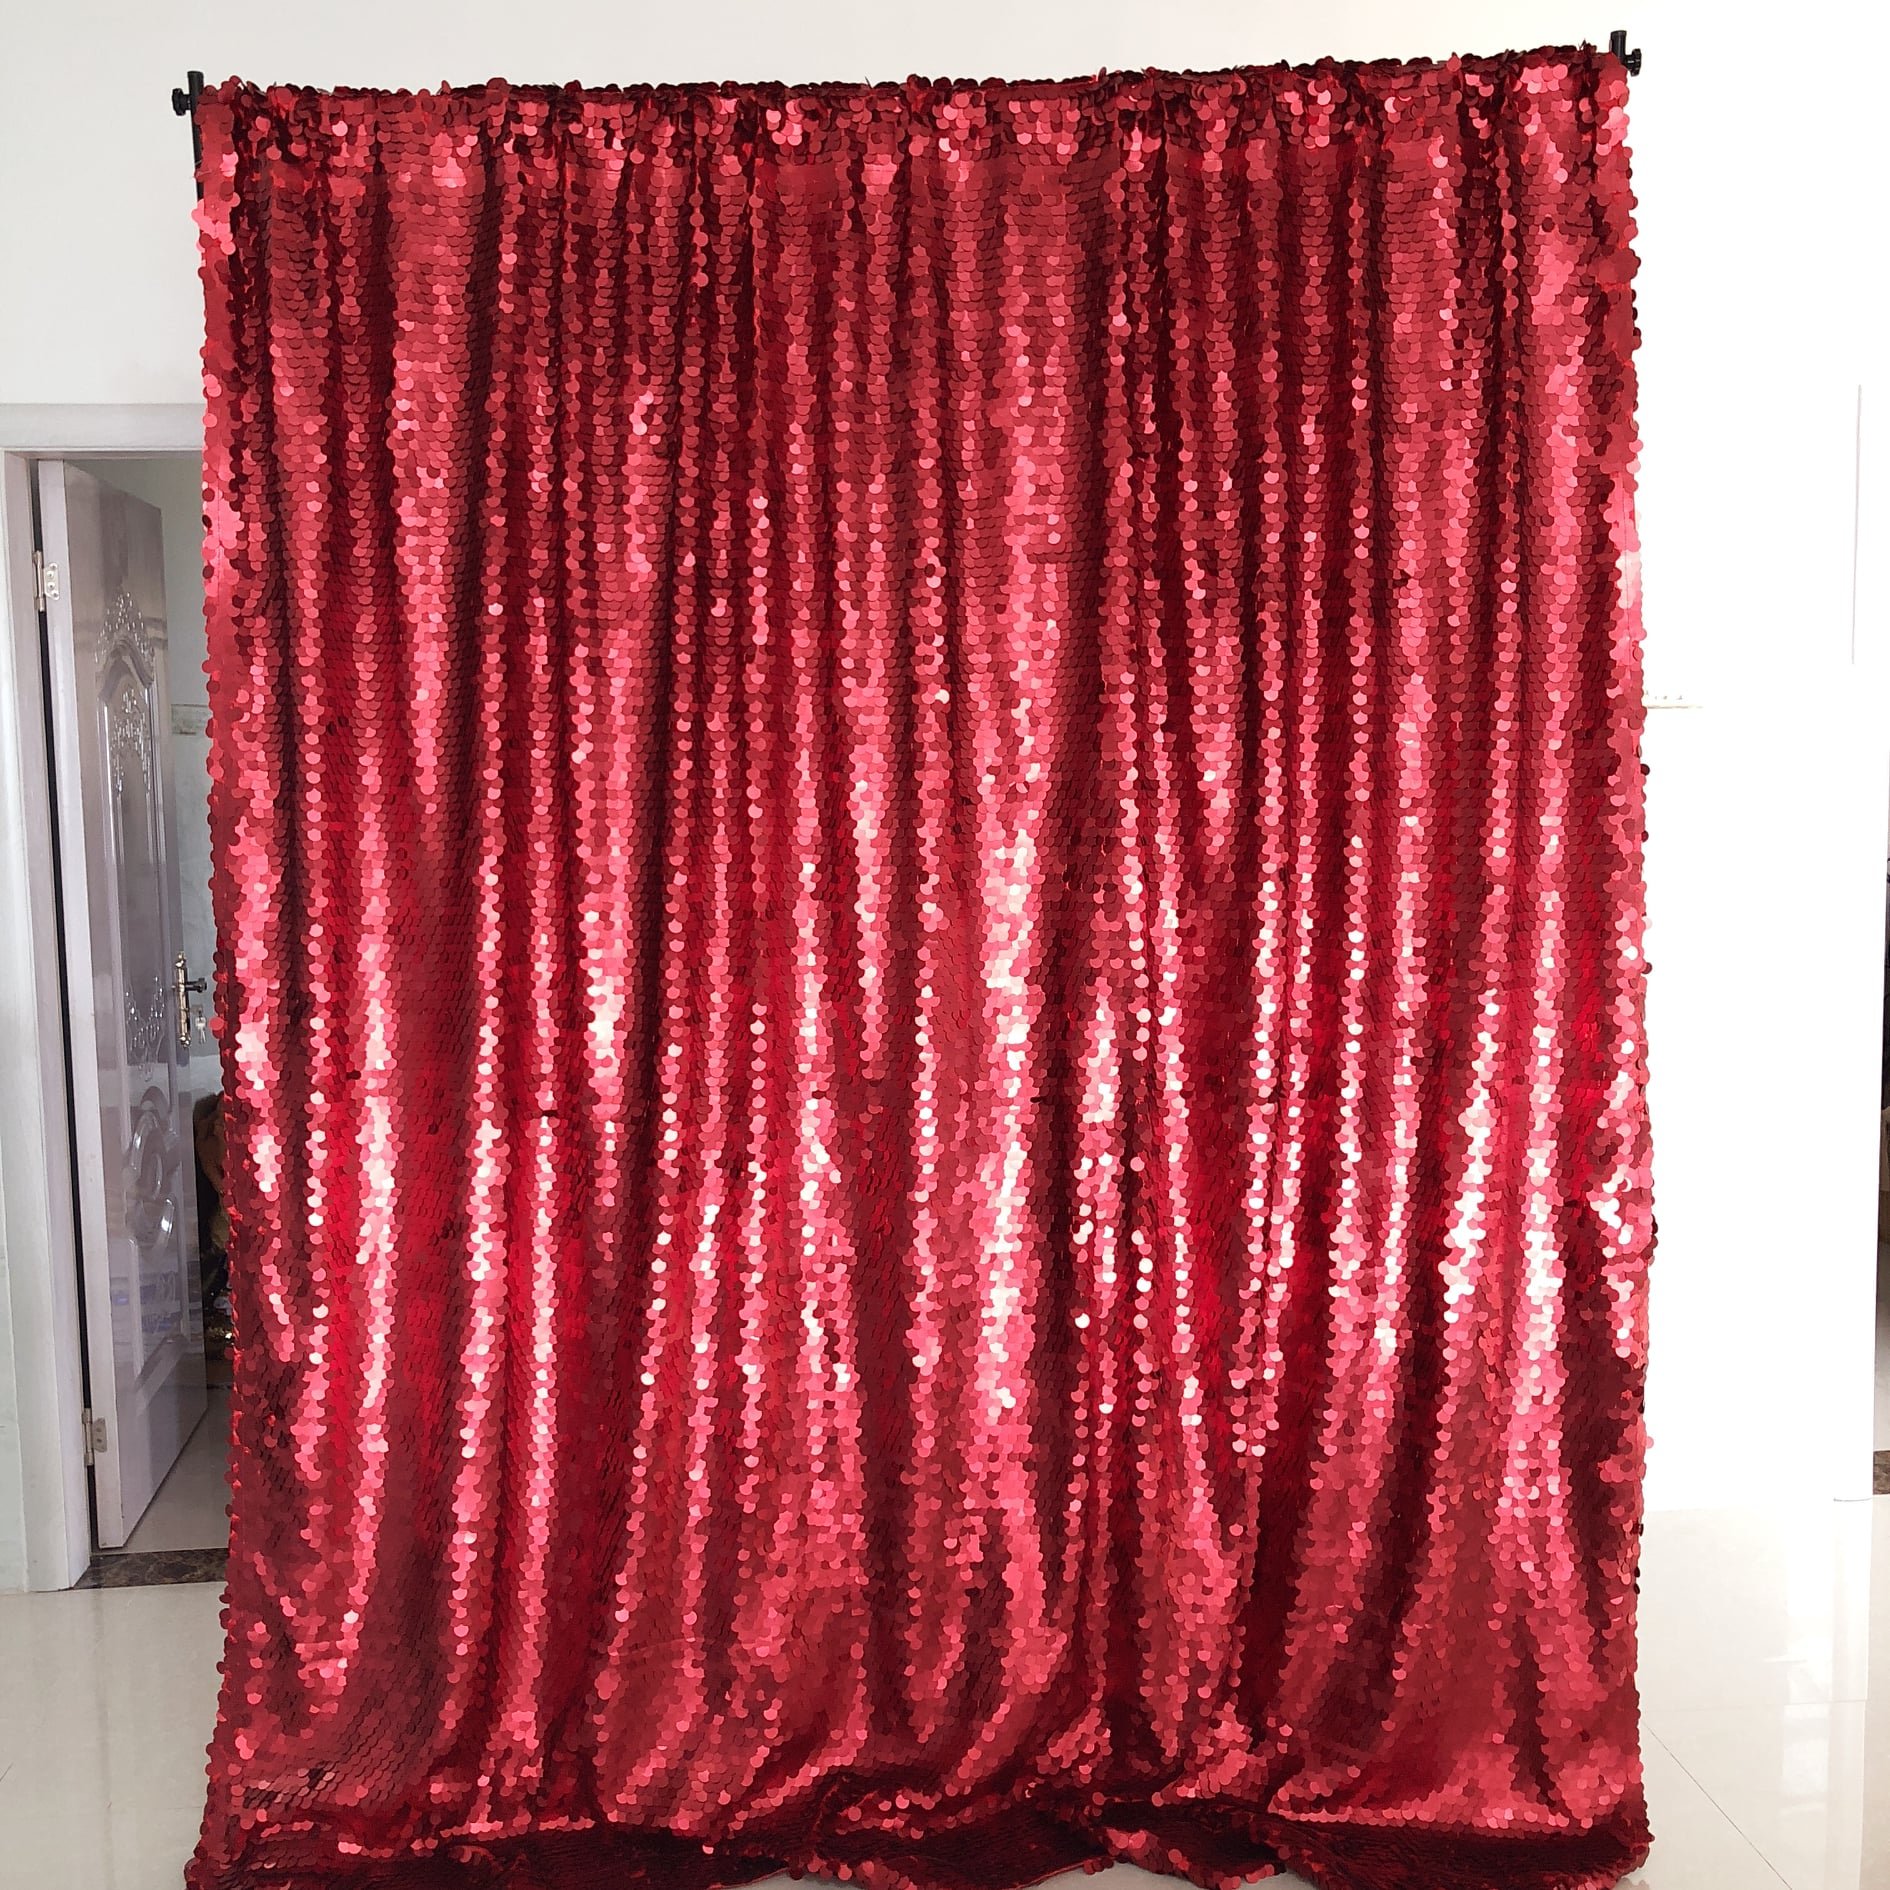 CURTAIN - Red - Large Sequin